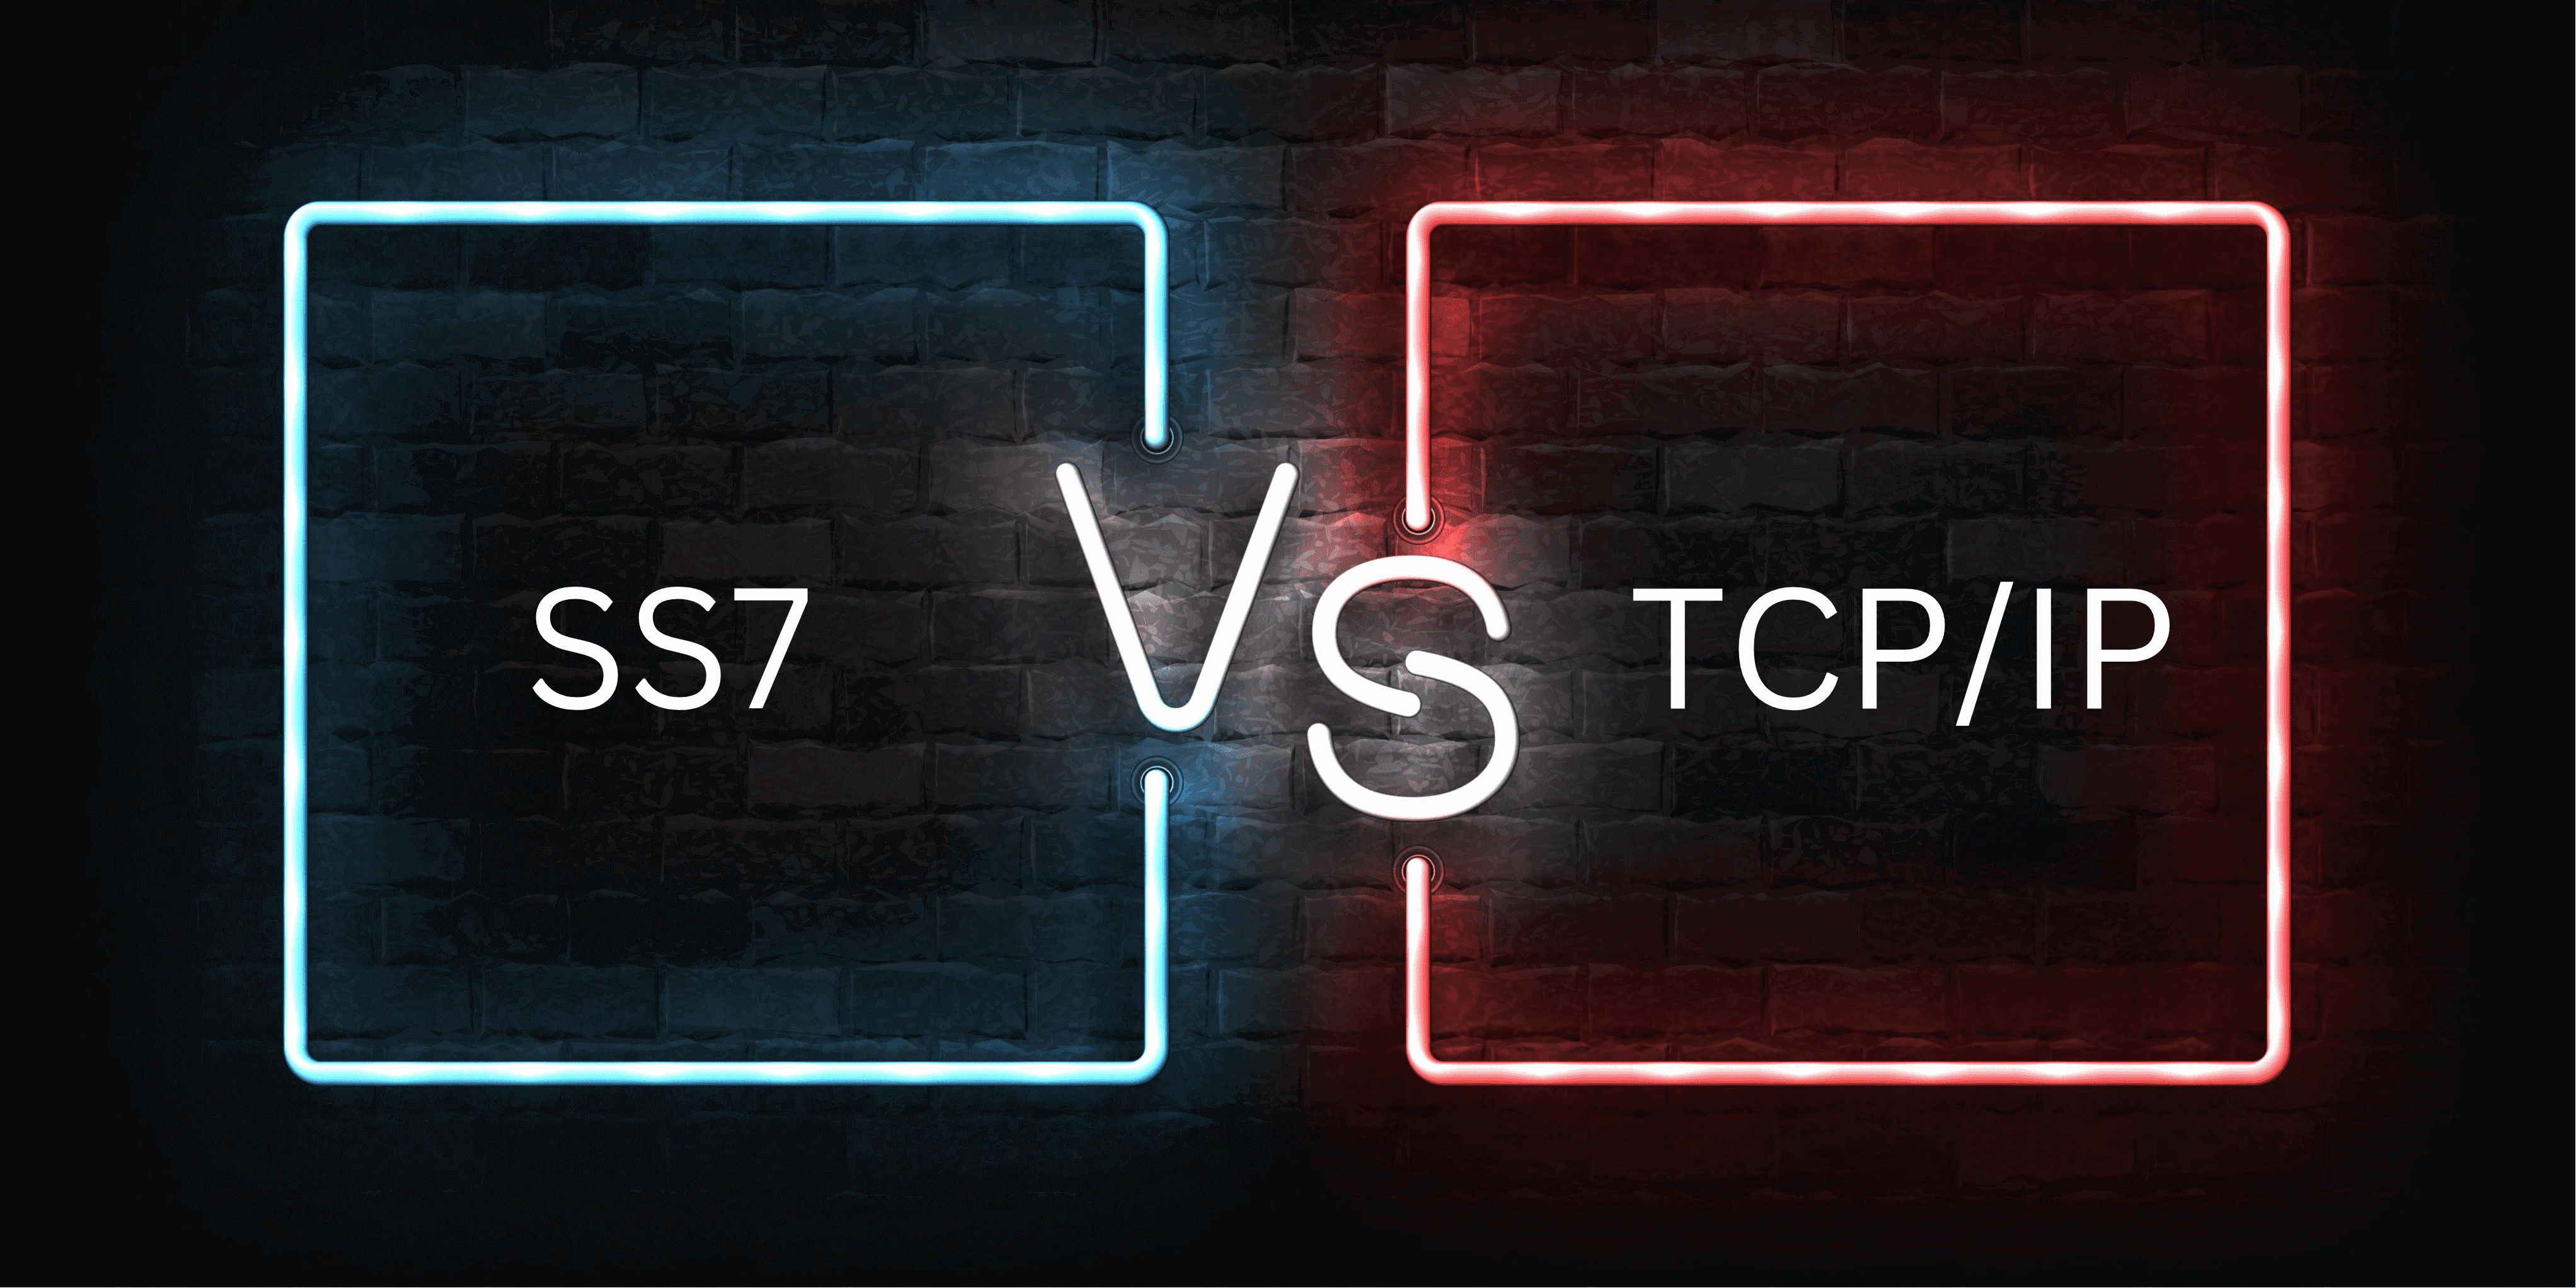 What is the difference between SS7 and TCP IP?